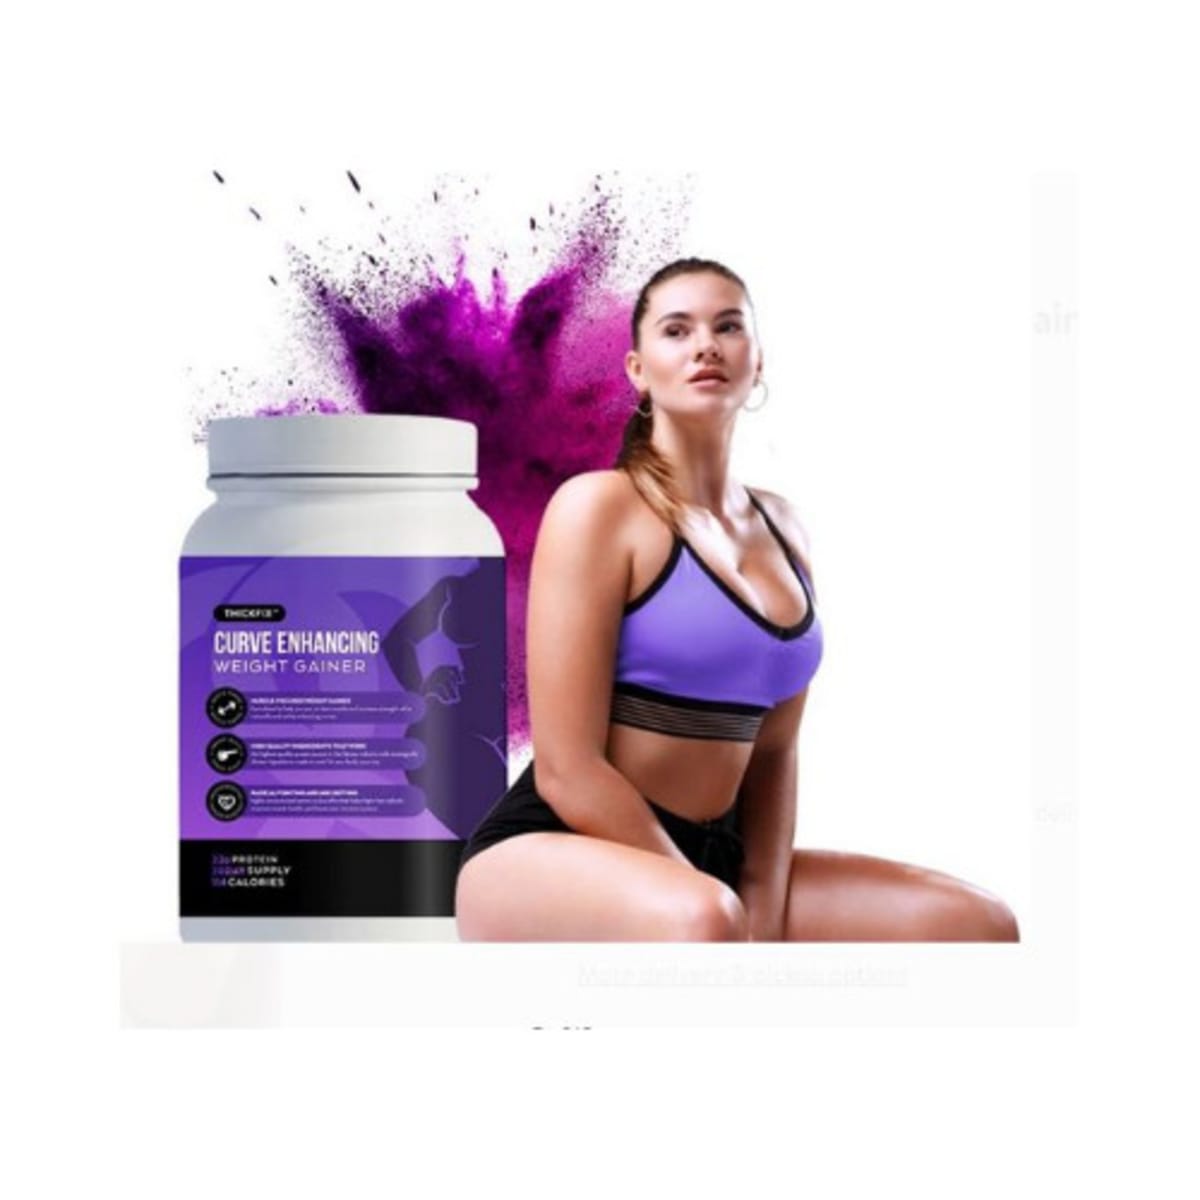 Gluteboost Curve Enhancing Weight Gainer Shake 28 Days